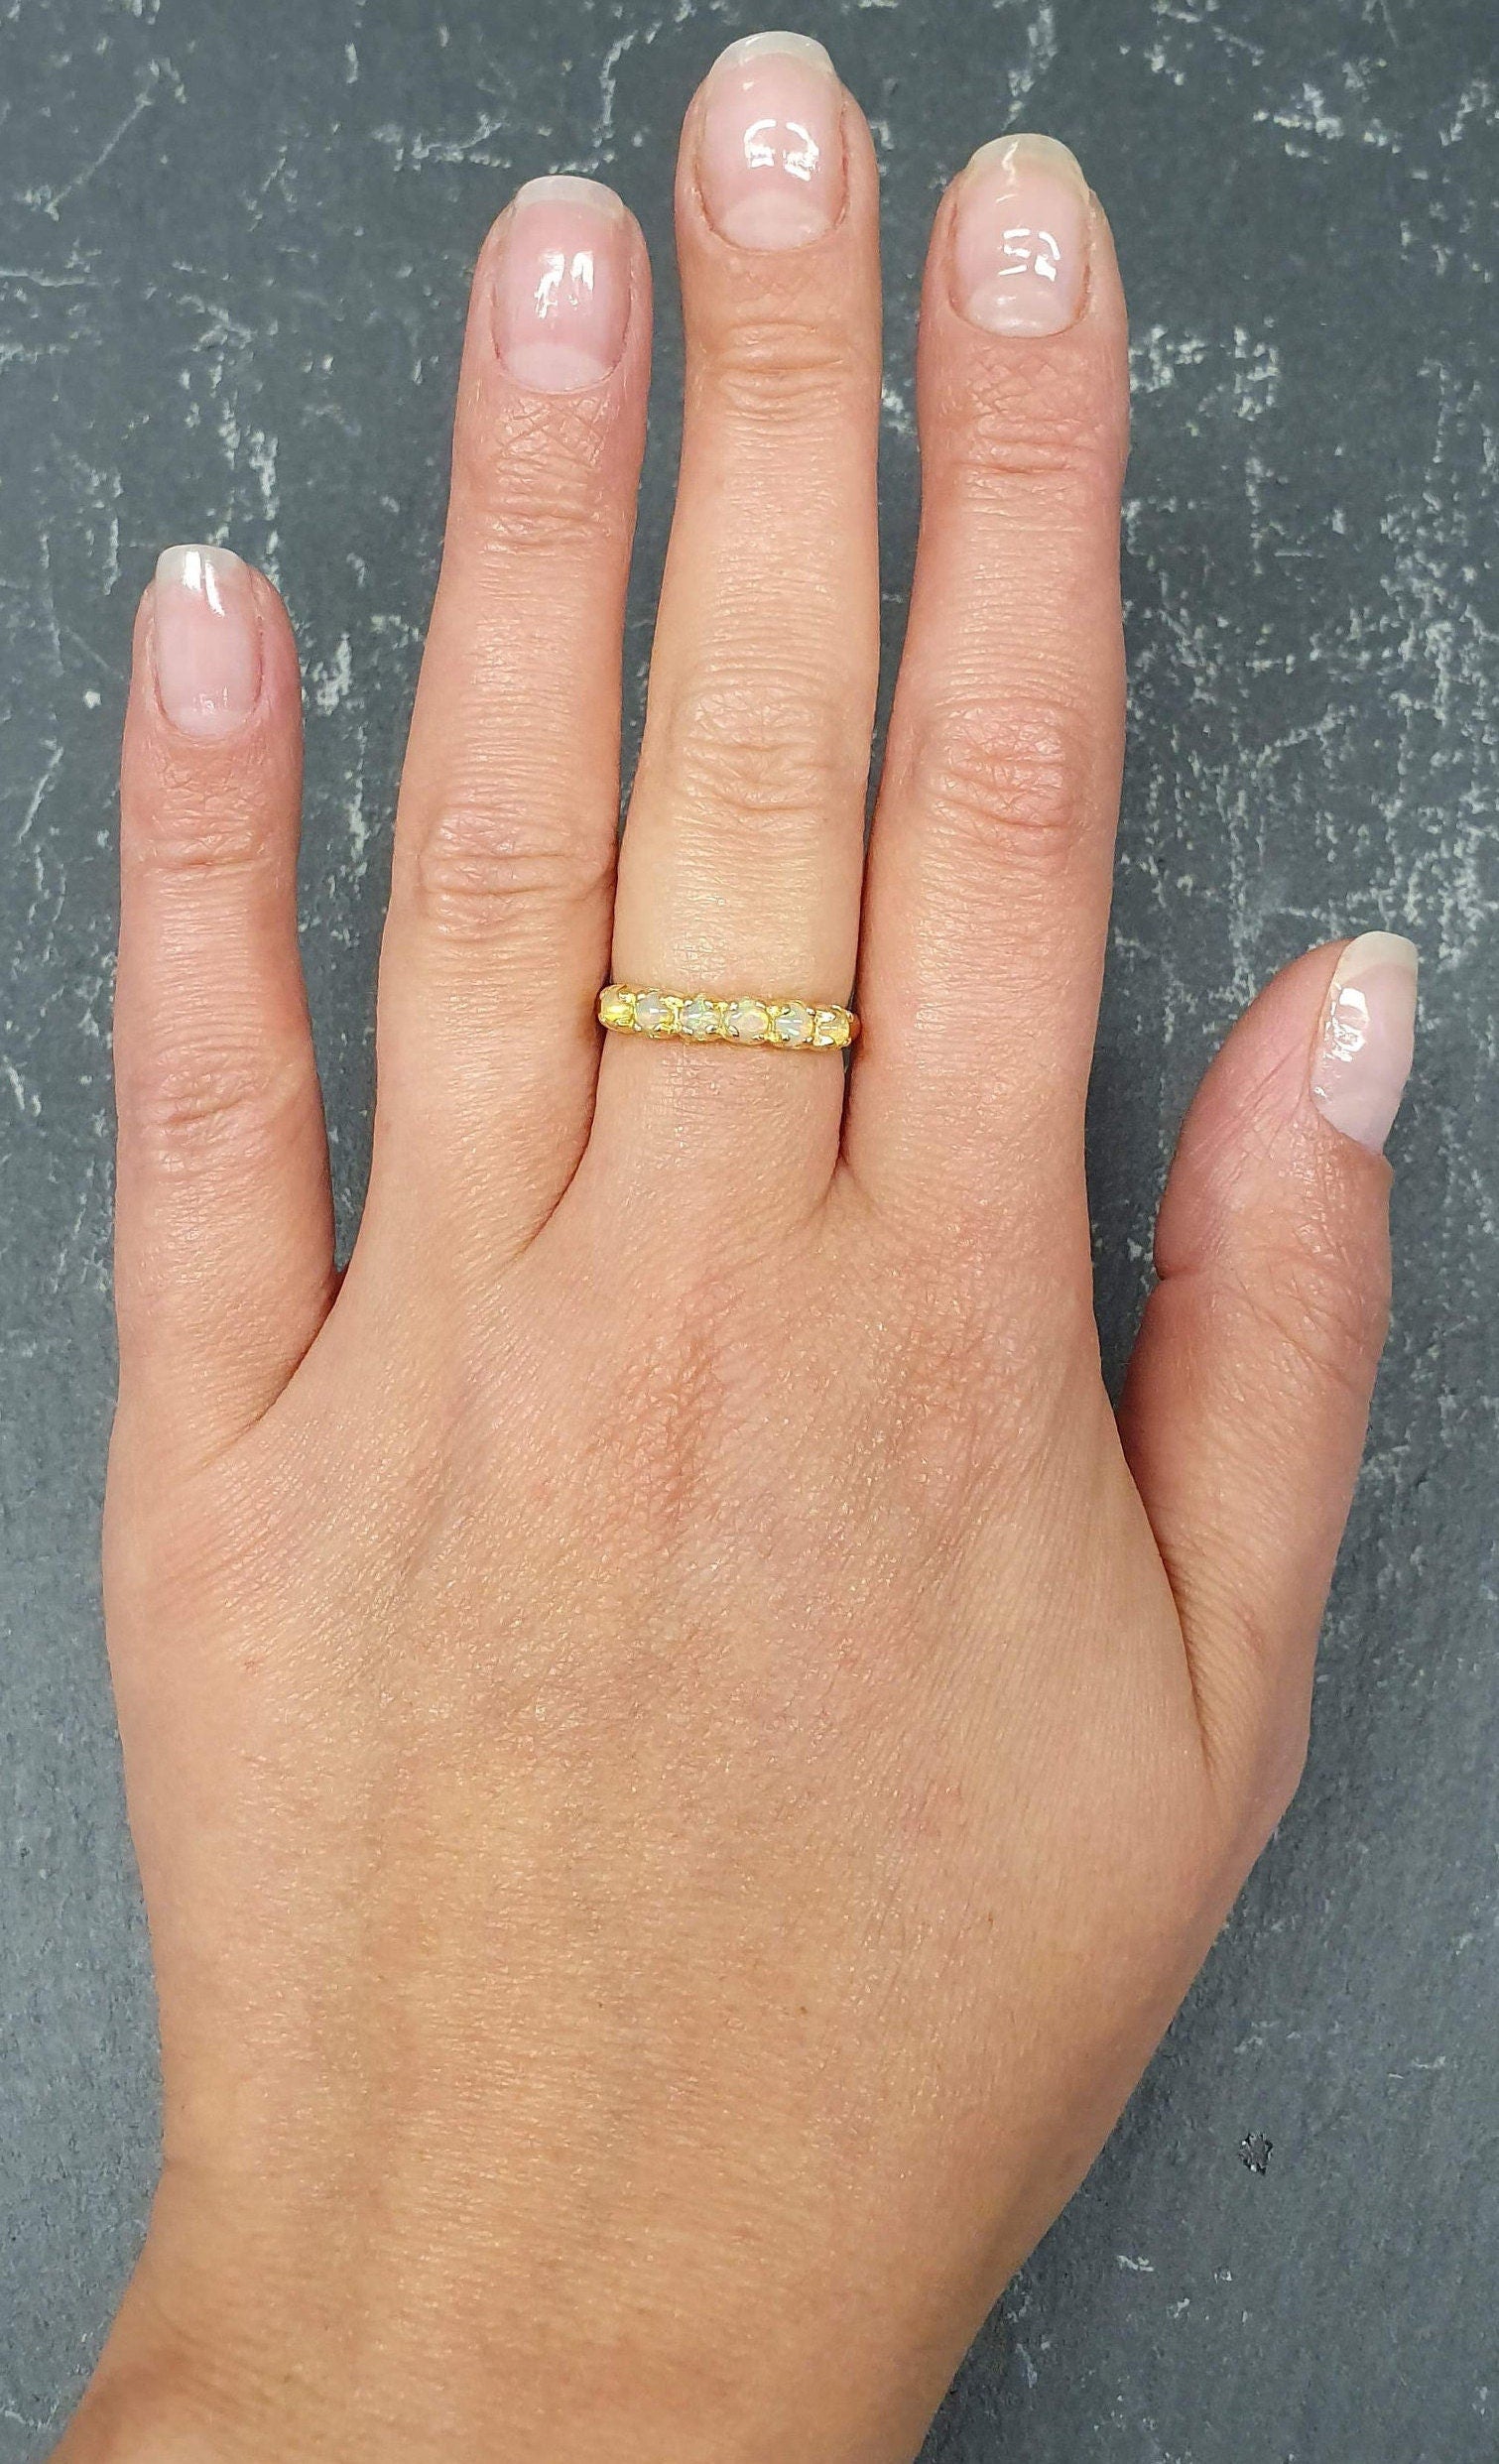 Gold Opal Band, Opal Band, Natural Opal Ring, Gold Eternity Band, October Birthstone, Fire Opal Ring, Vintage Opal Ring, Gold Vintage Ring